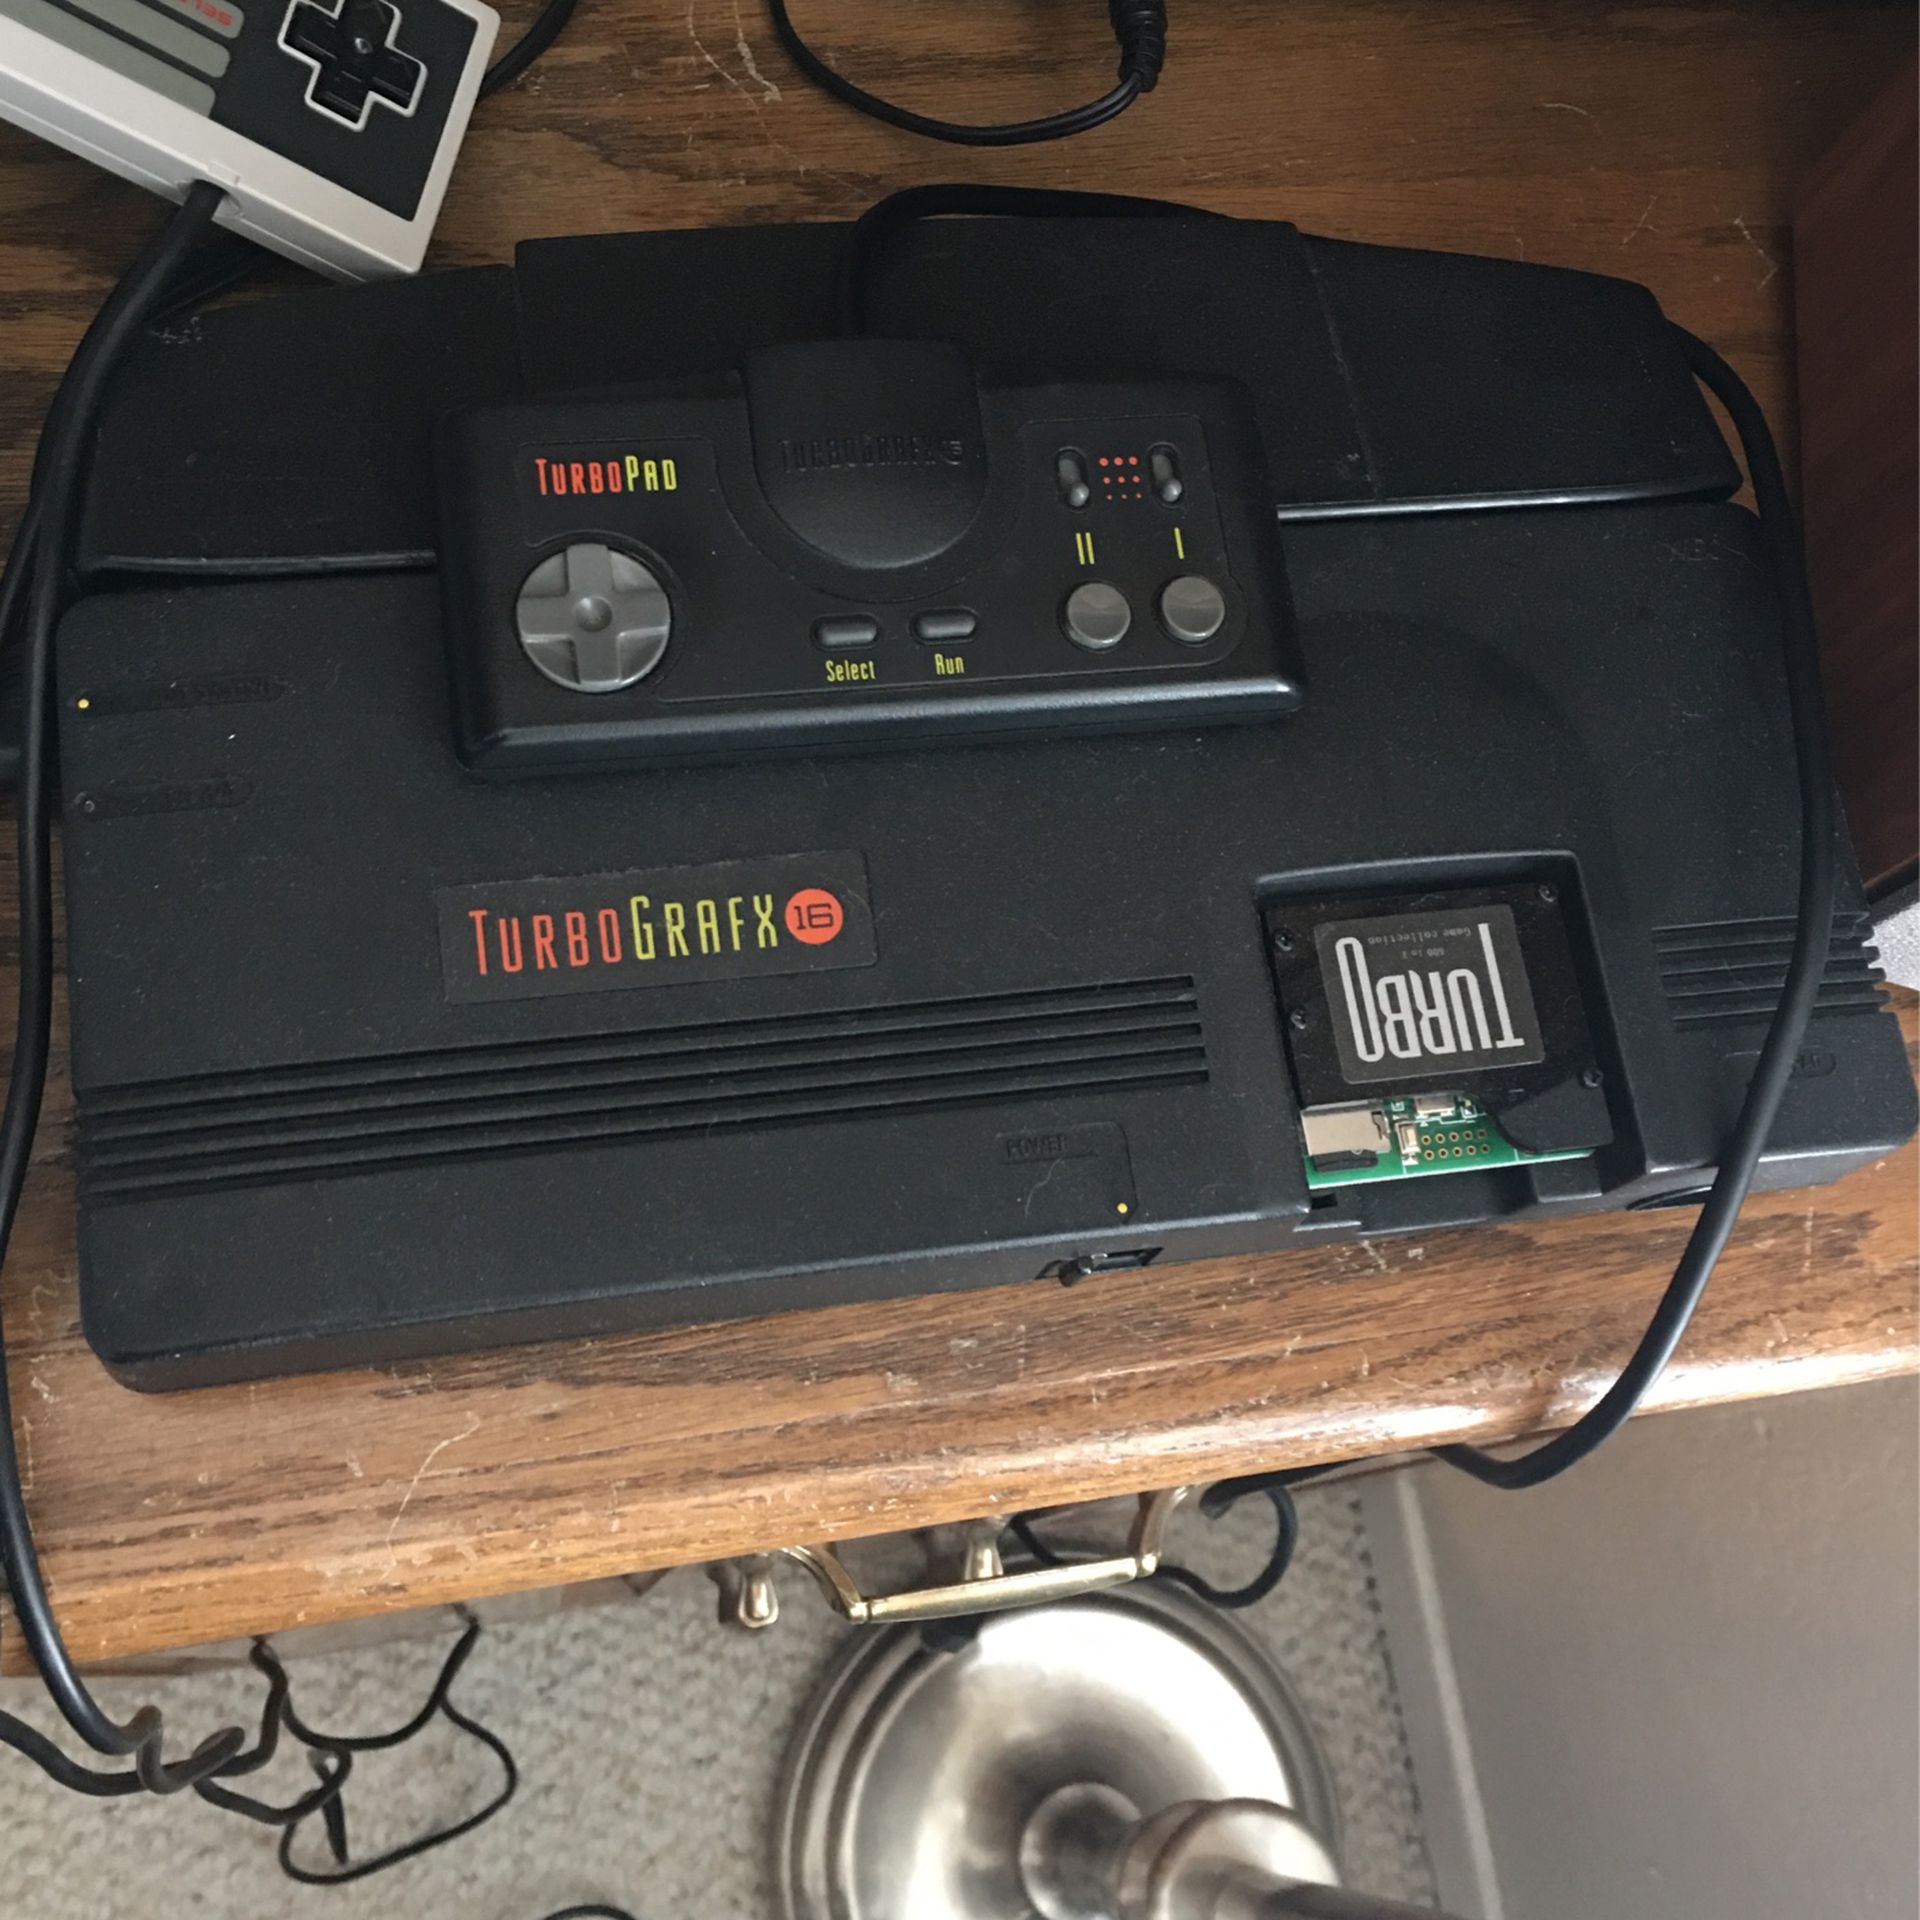 Turbografx 16 with Everdrive clone and full set of games